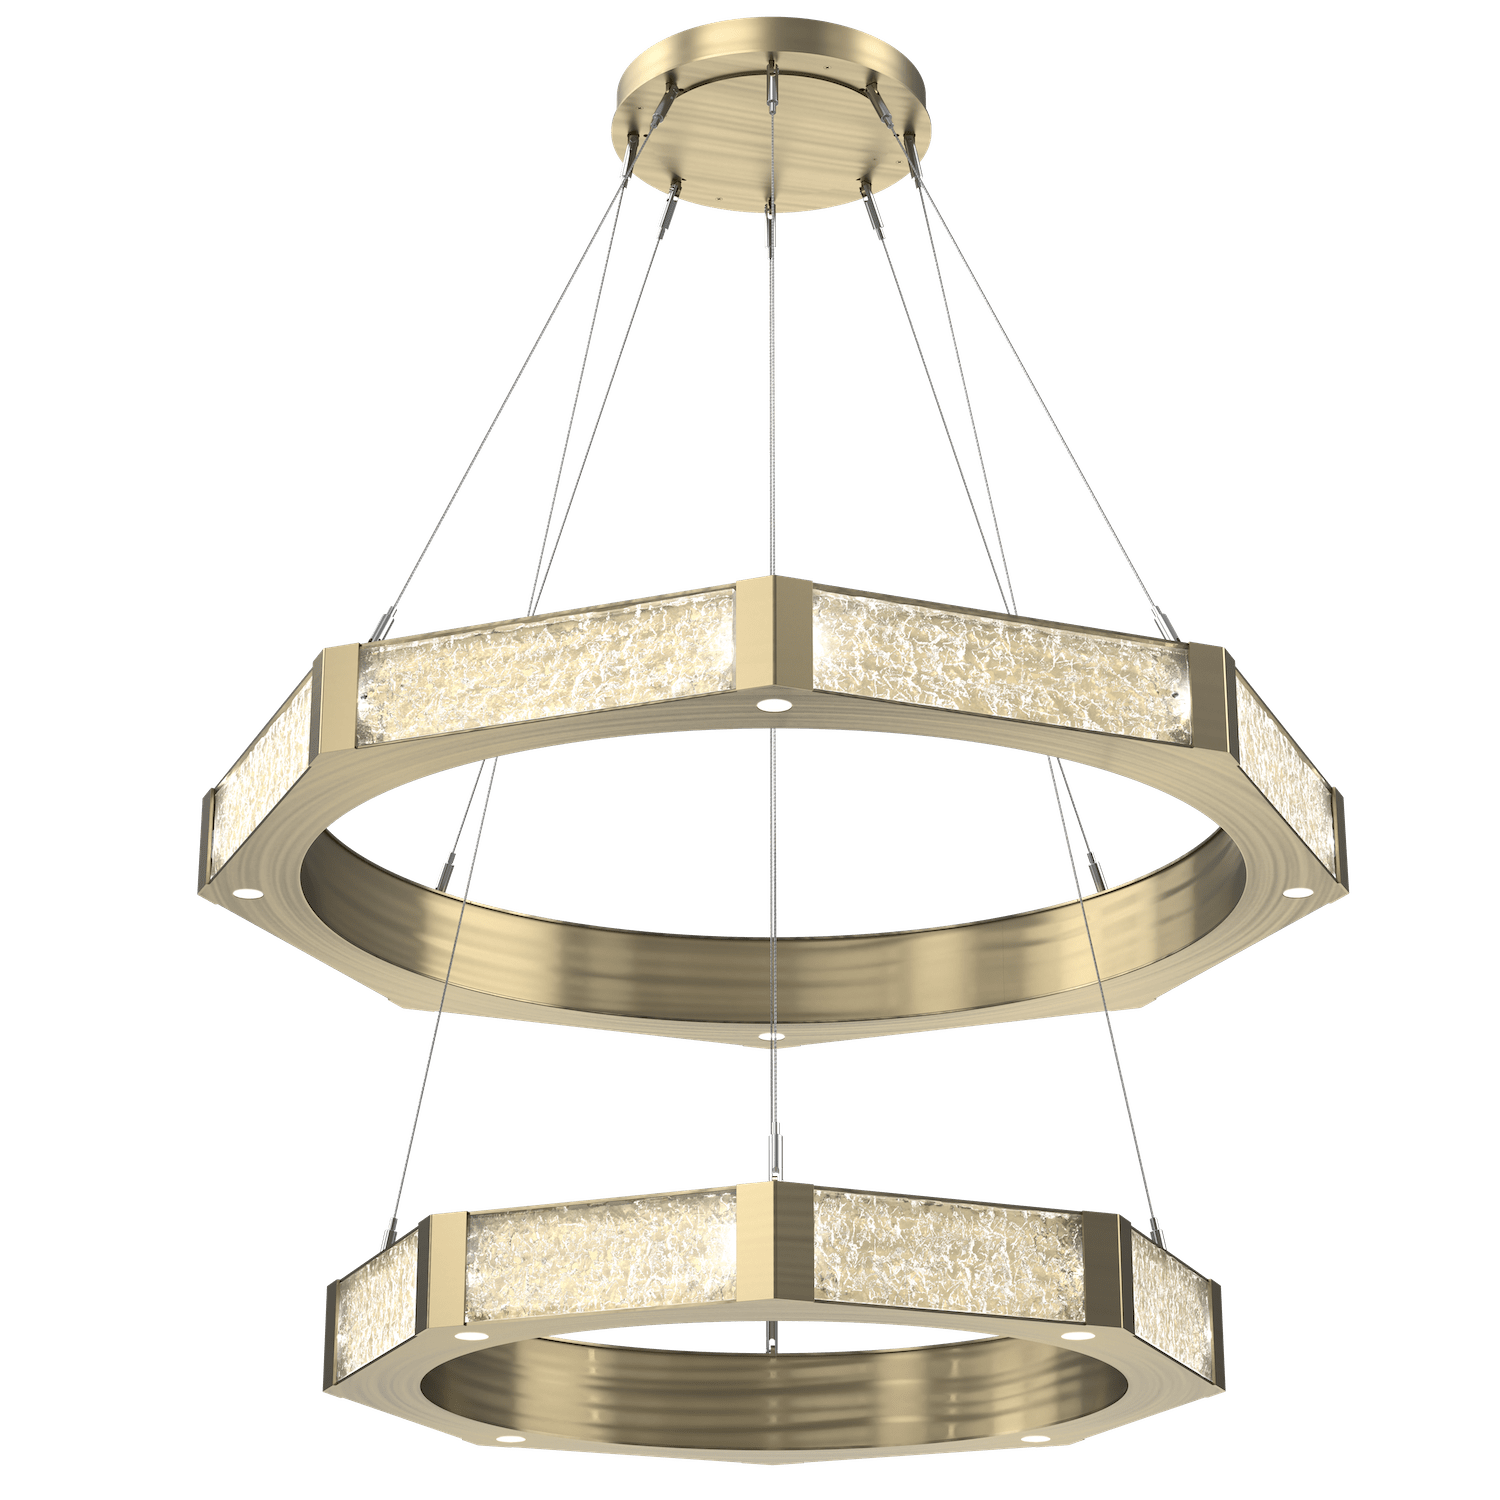 CHB0061-2B-HB-GC-Hammerton-Studio-Glacier-48-inch-two-tier-ring-chandelier-with-heritage-brass-finish-and-clear-blown-glass-with-geo-clear-cast-glass-diffusers-and-LED-lamping